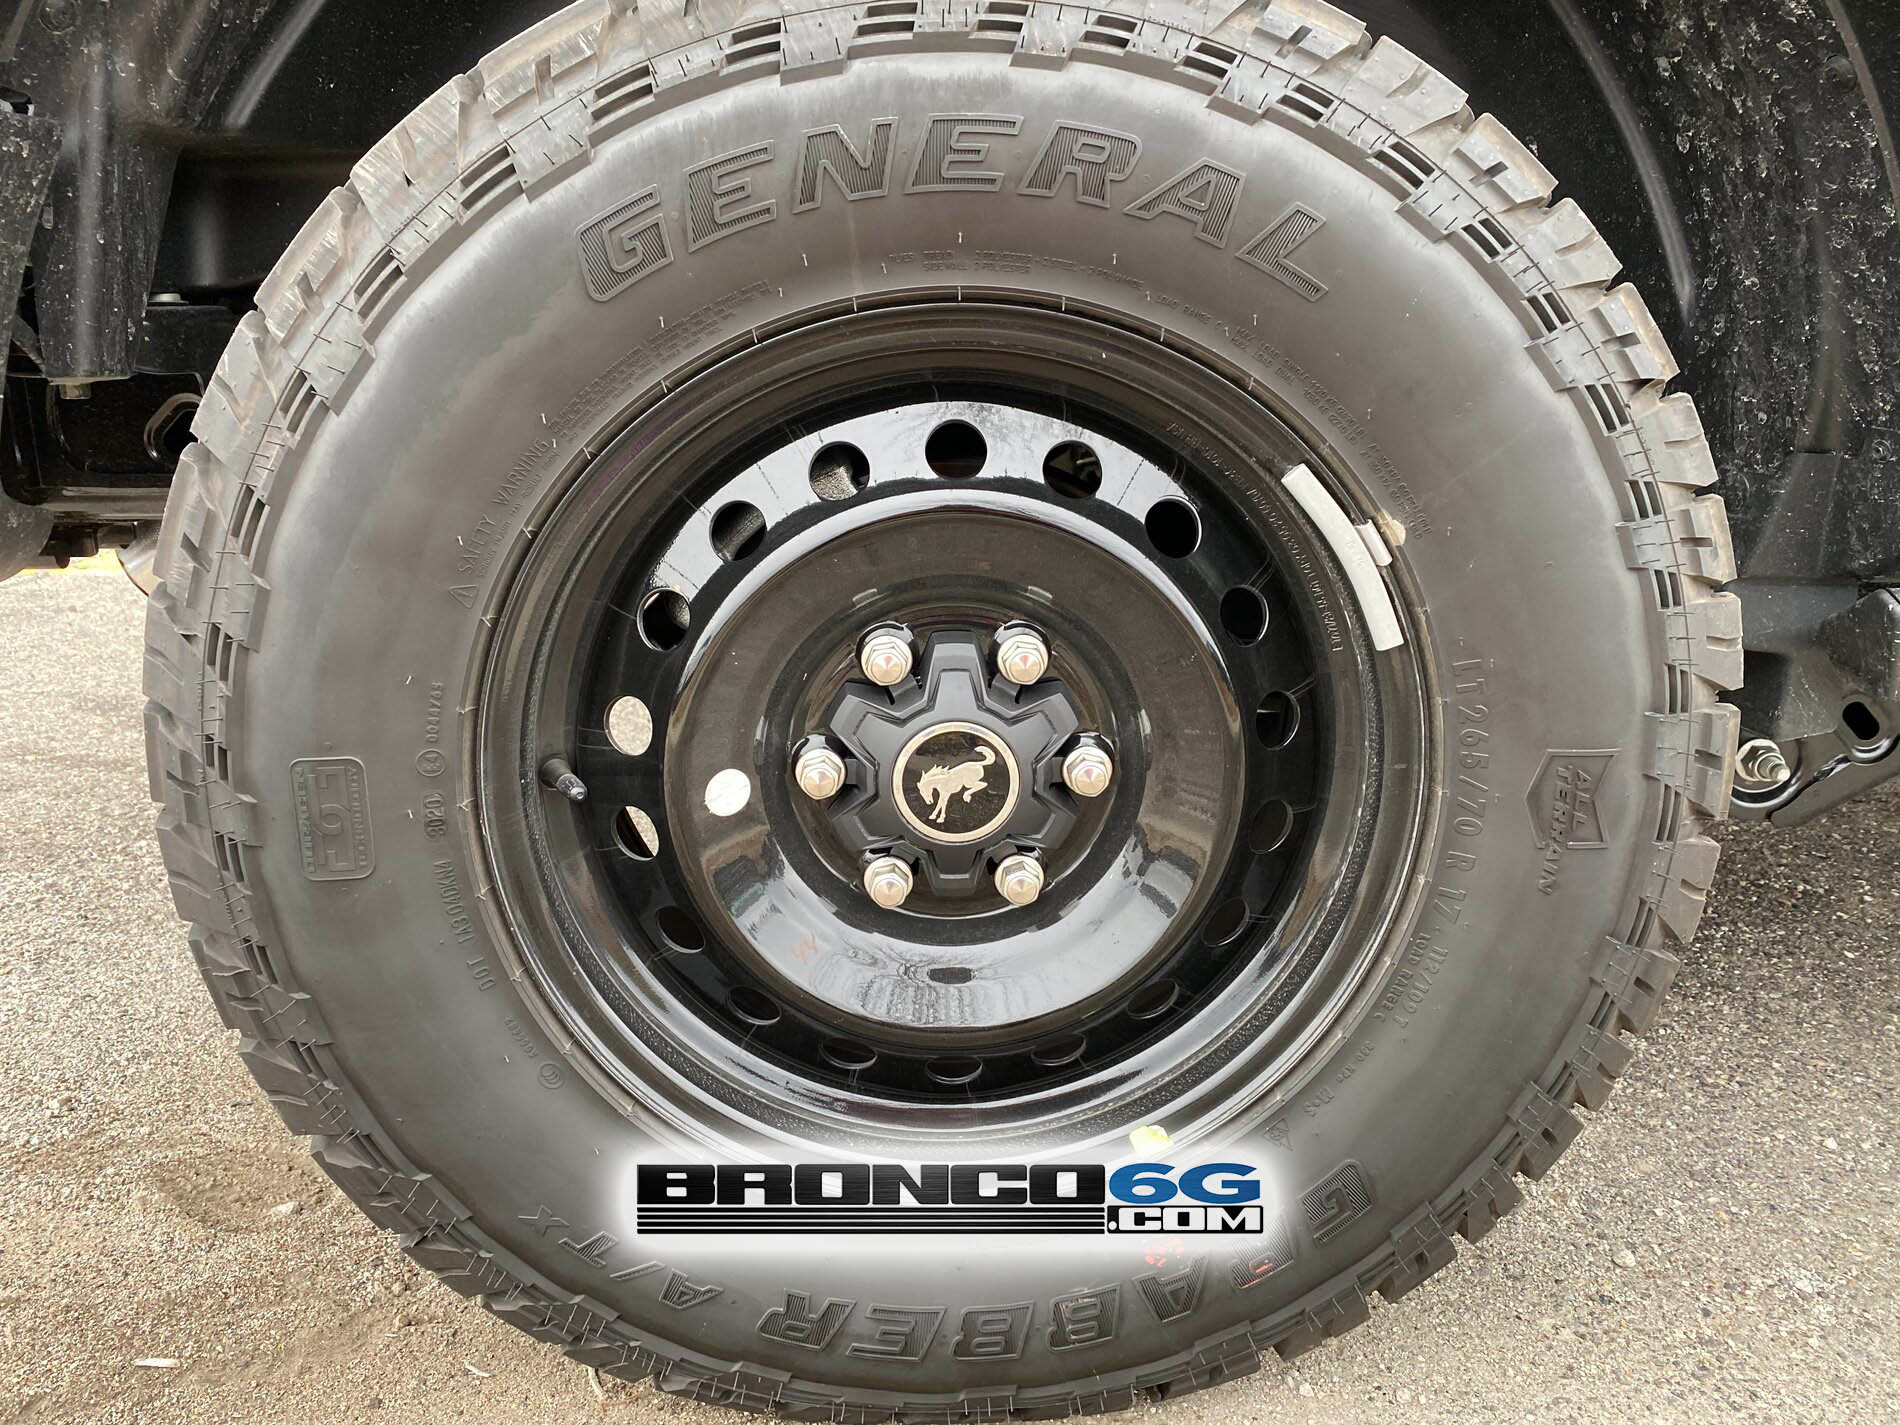 Ford Bronco 12/13 UPDATE - Updated control arms not just for Sasquatch 33s fitting OBX - 33.2x11.2 (275/70r18) close to max size after Ranger testing AC83B42C-AAAC-44C5-9B80-DB9F2C8C1F2E